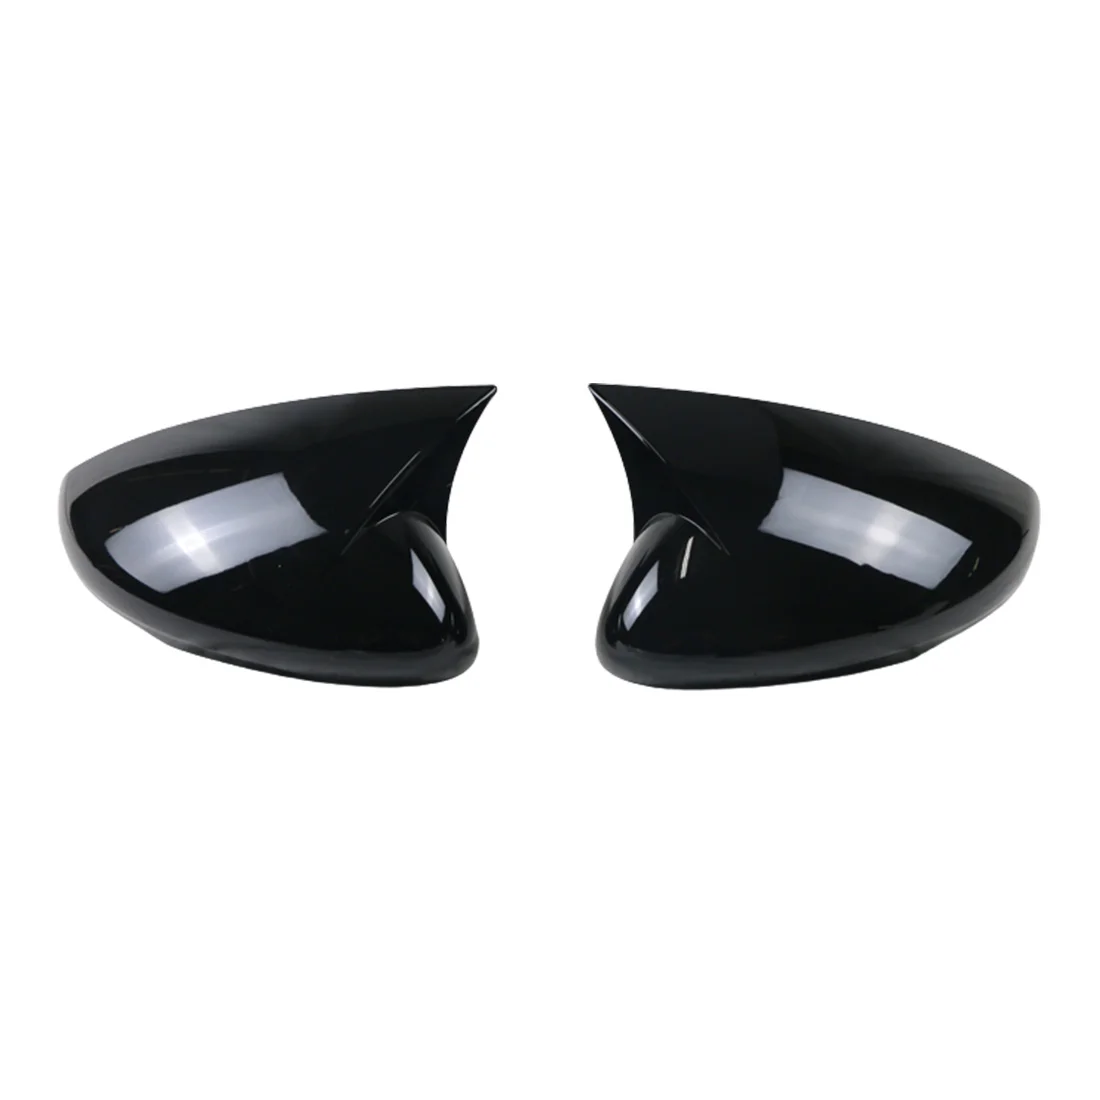 

Car Glossy Black Ox Horn Side Mirror Cover Caps Door Mirror Shell Rear Mirror Guard for Ford Mustang Mach-E 2021 2022